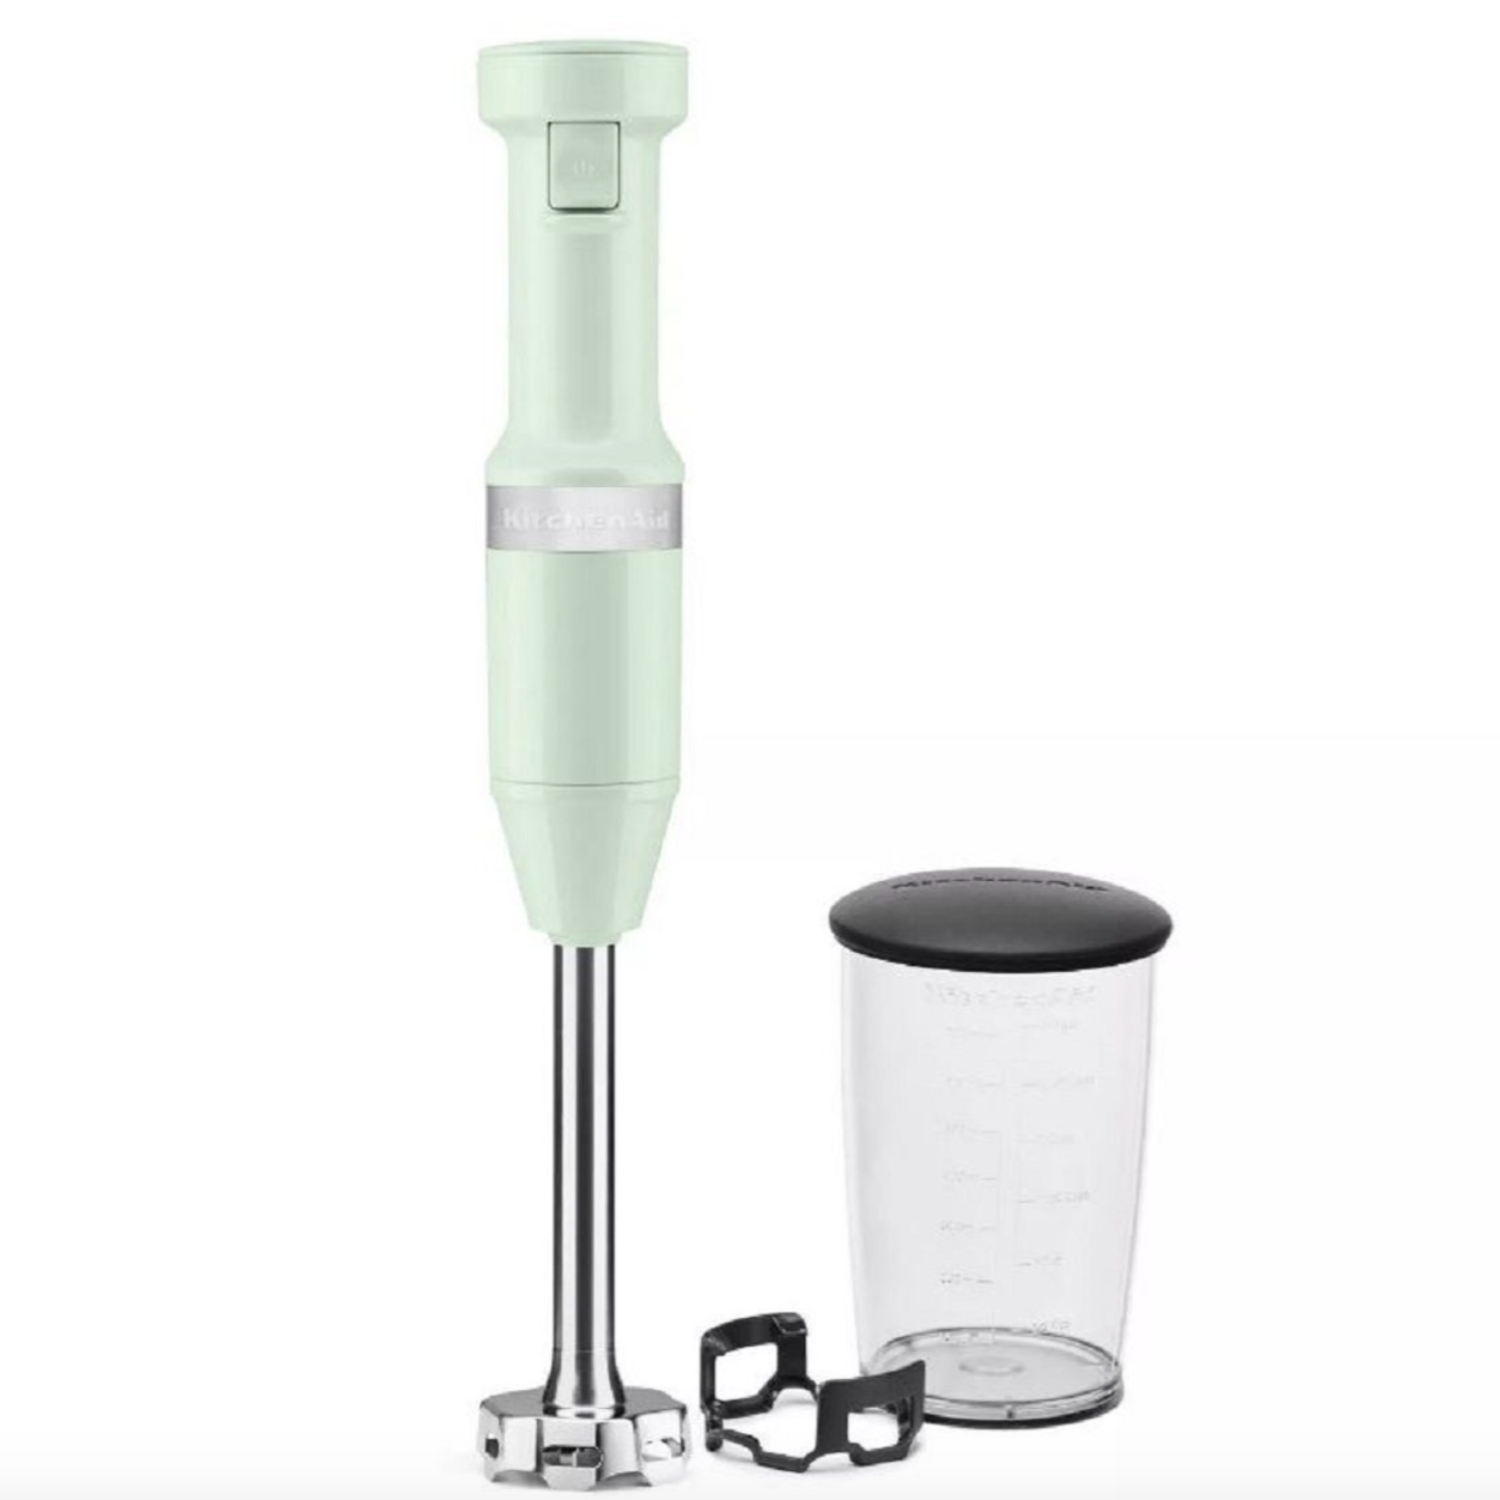 Cuisinart Variable Speed Immersion Blender with Food Processor